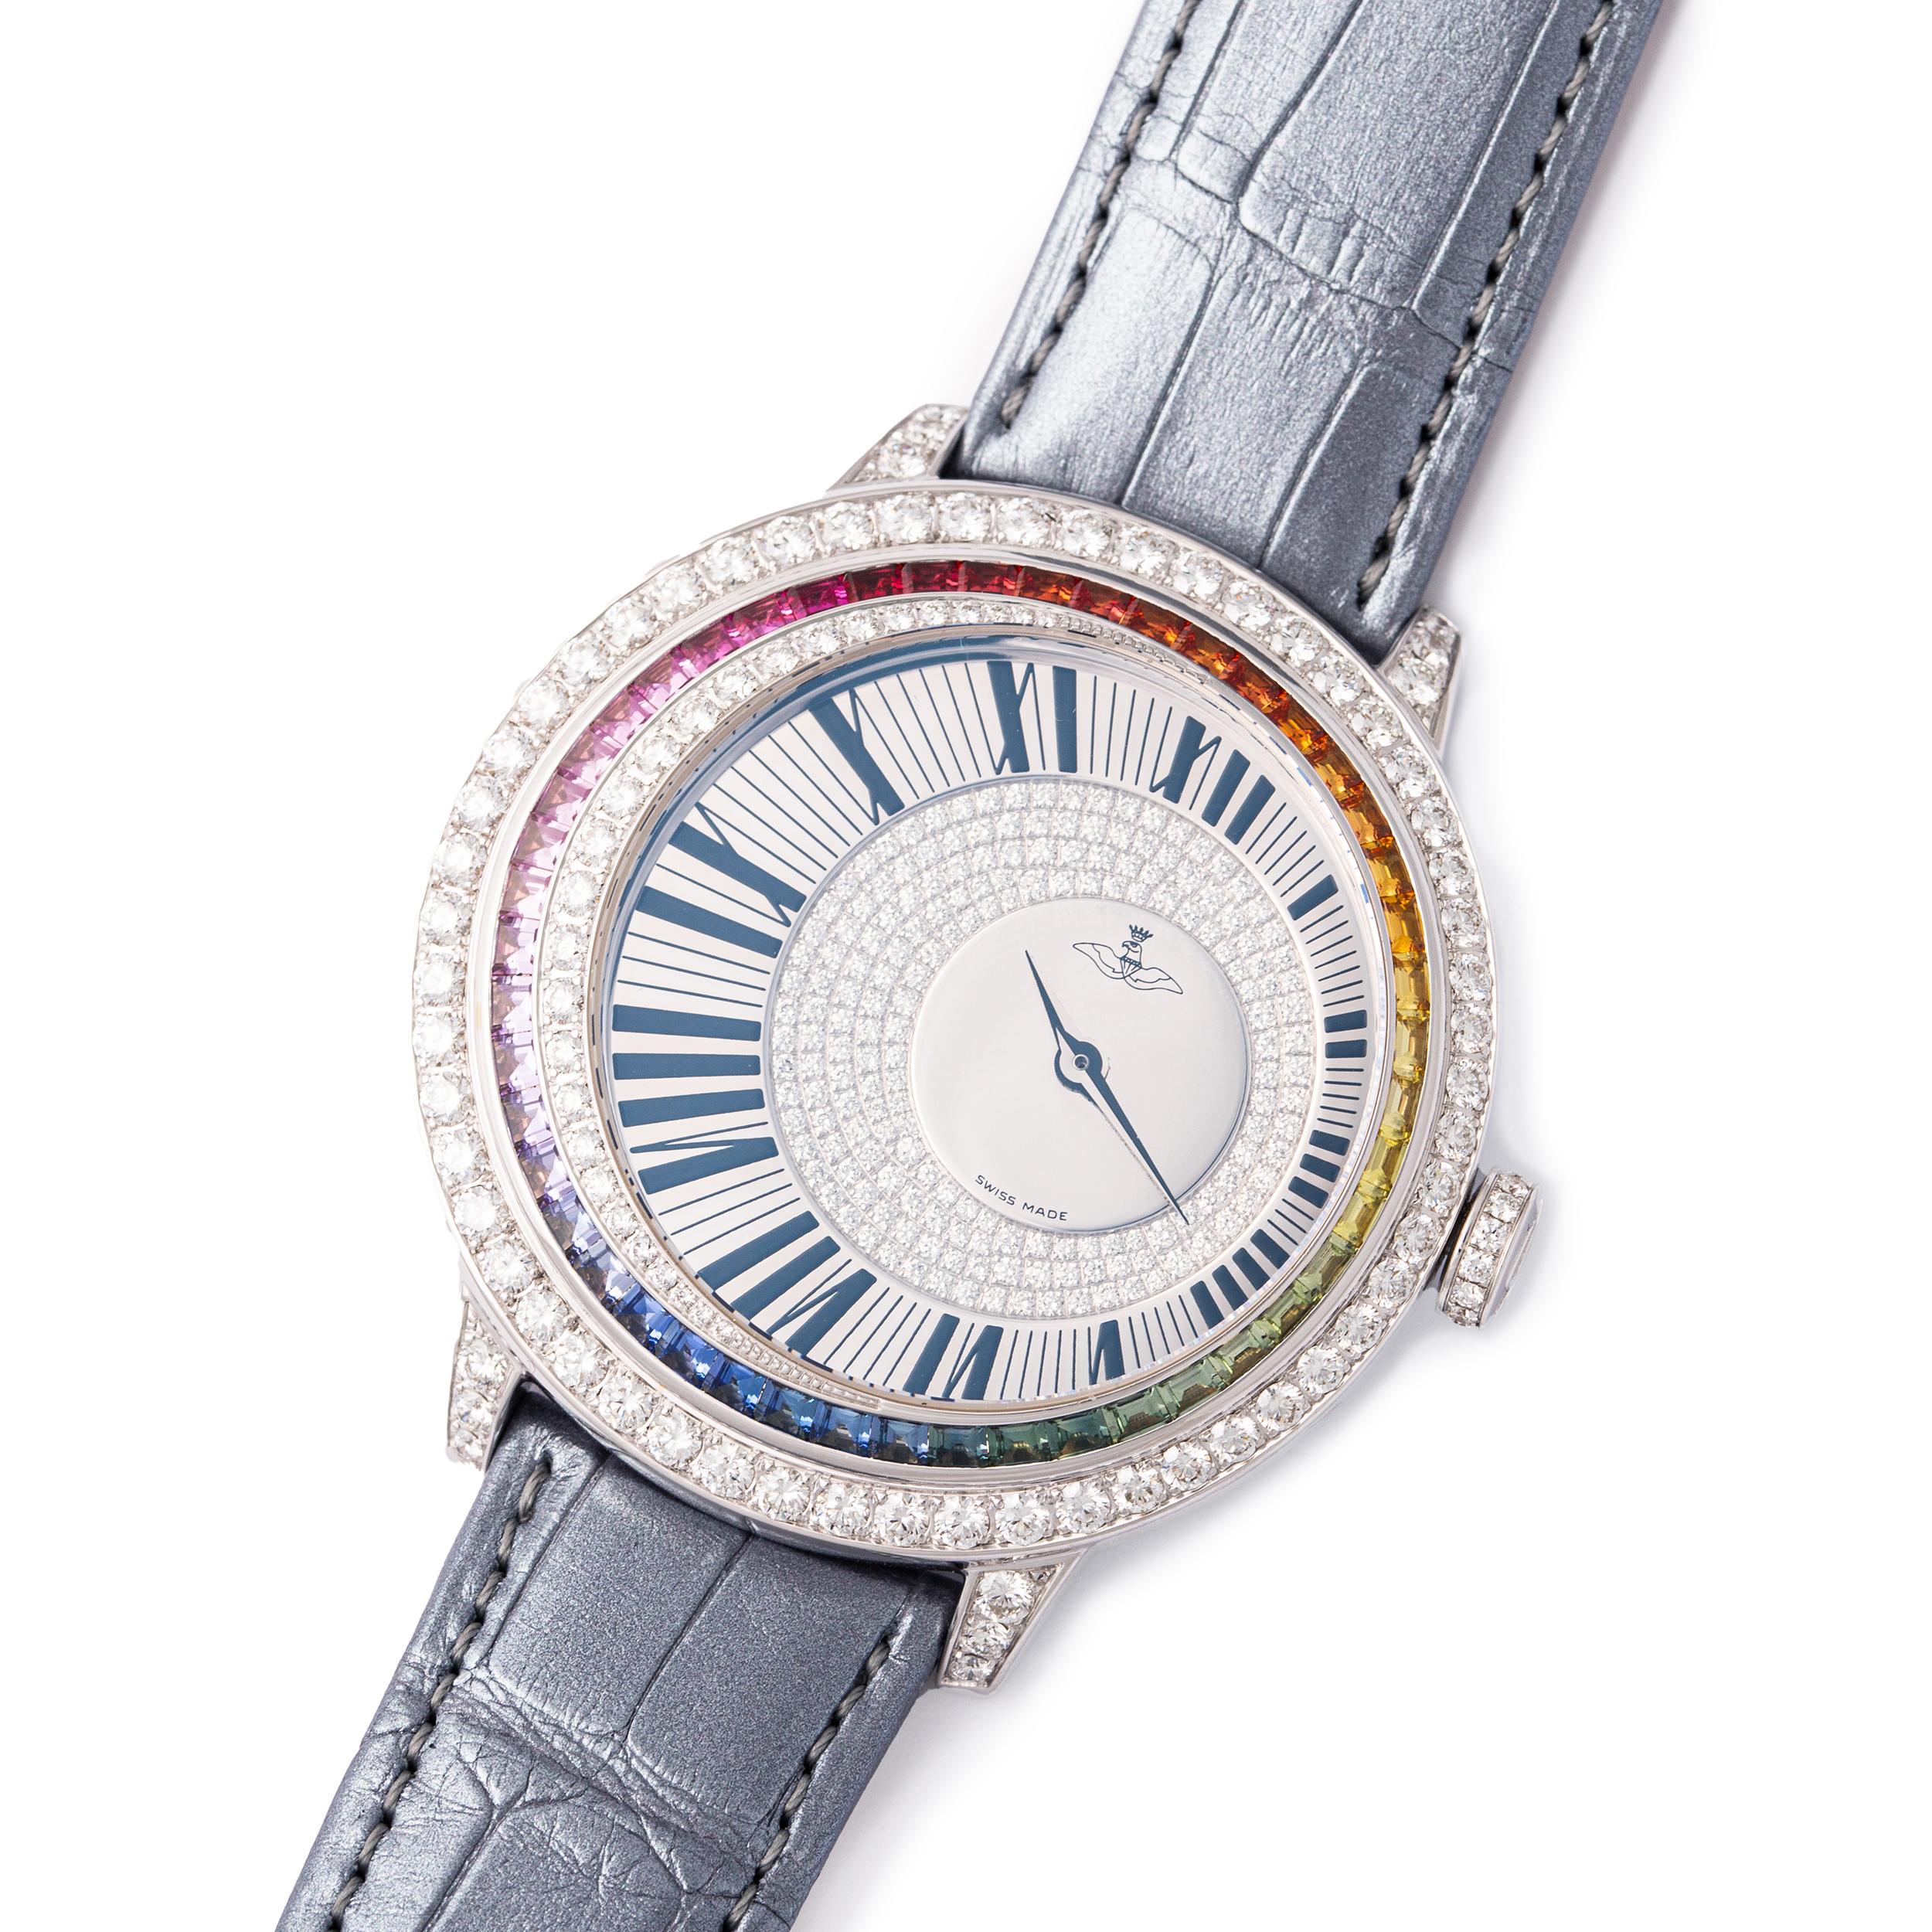 Watch in white gold 18kt set with 48 Rainbow sapphires 2.98 cts on bezel case dial set with 288 diamonds 3.85 cts and prong buckle alligator strap quartz movement. 